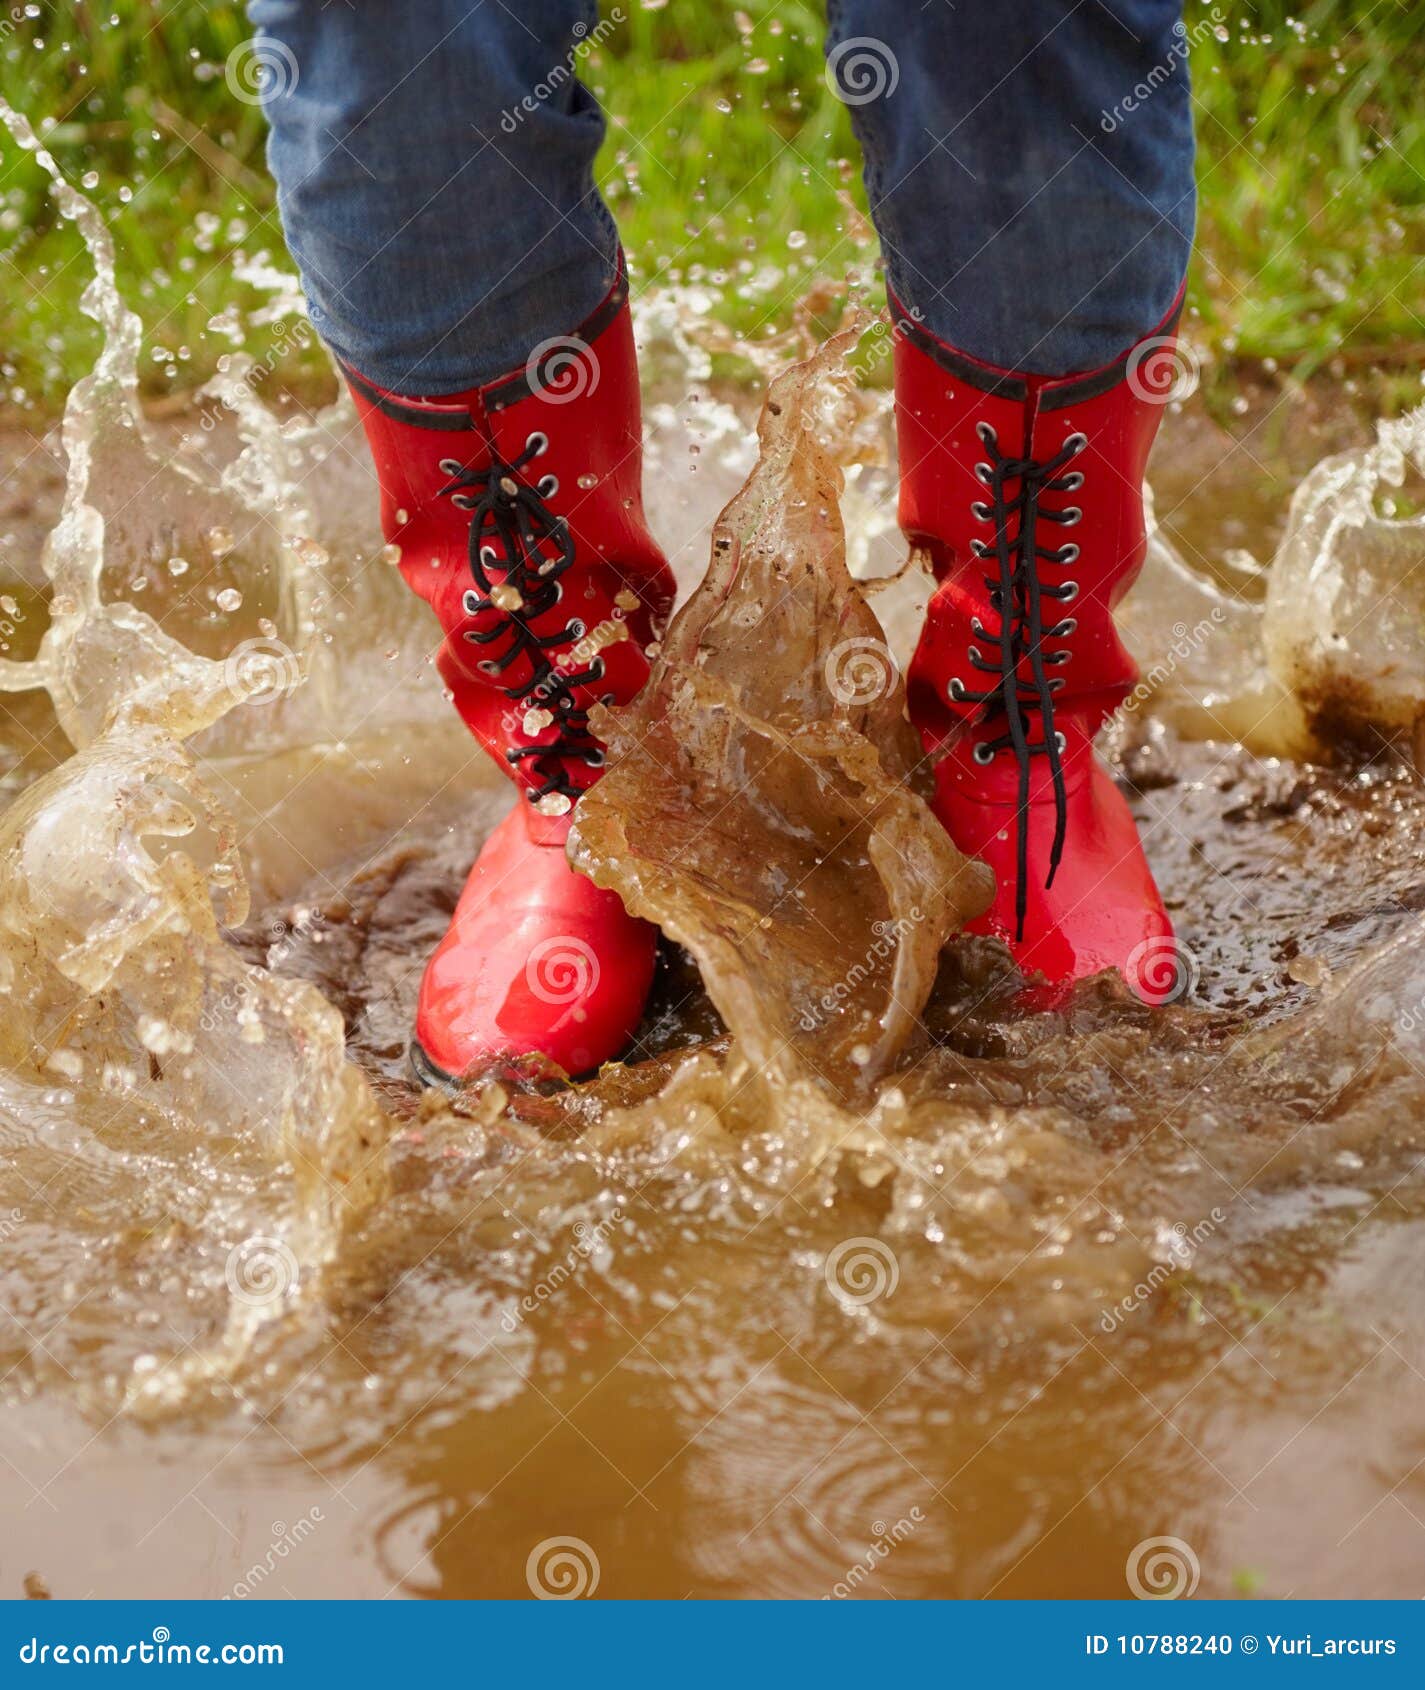 Human Legs Splashing in a Muddy Puddle Stock Photo - Image of adult ...